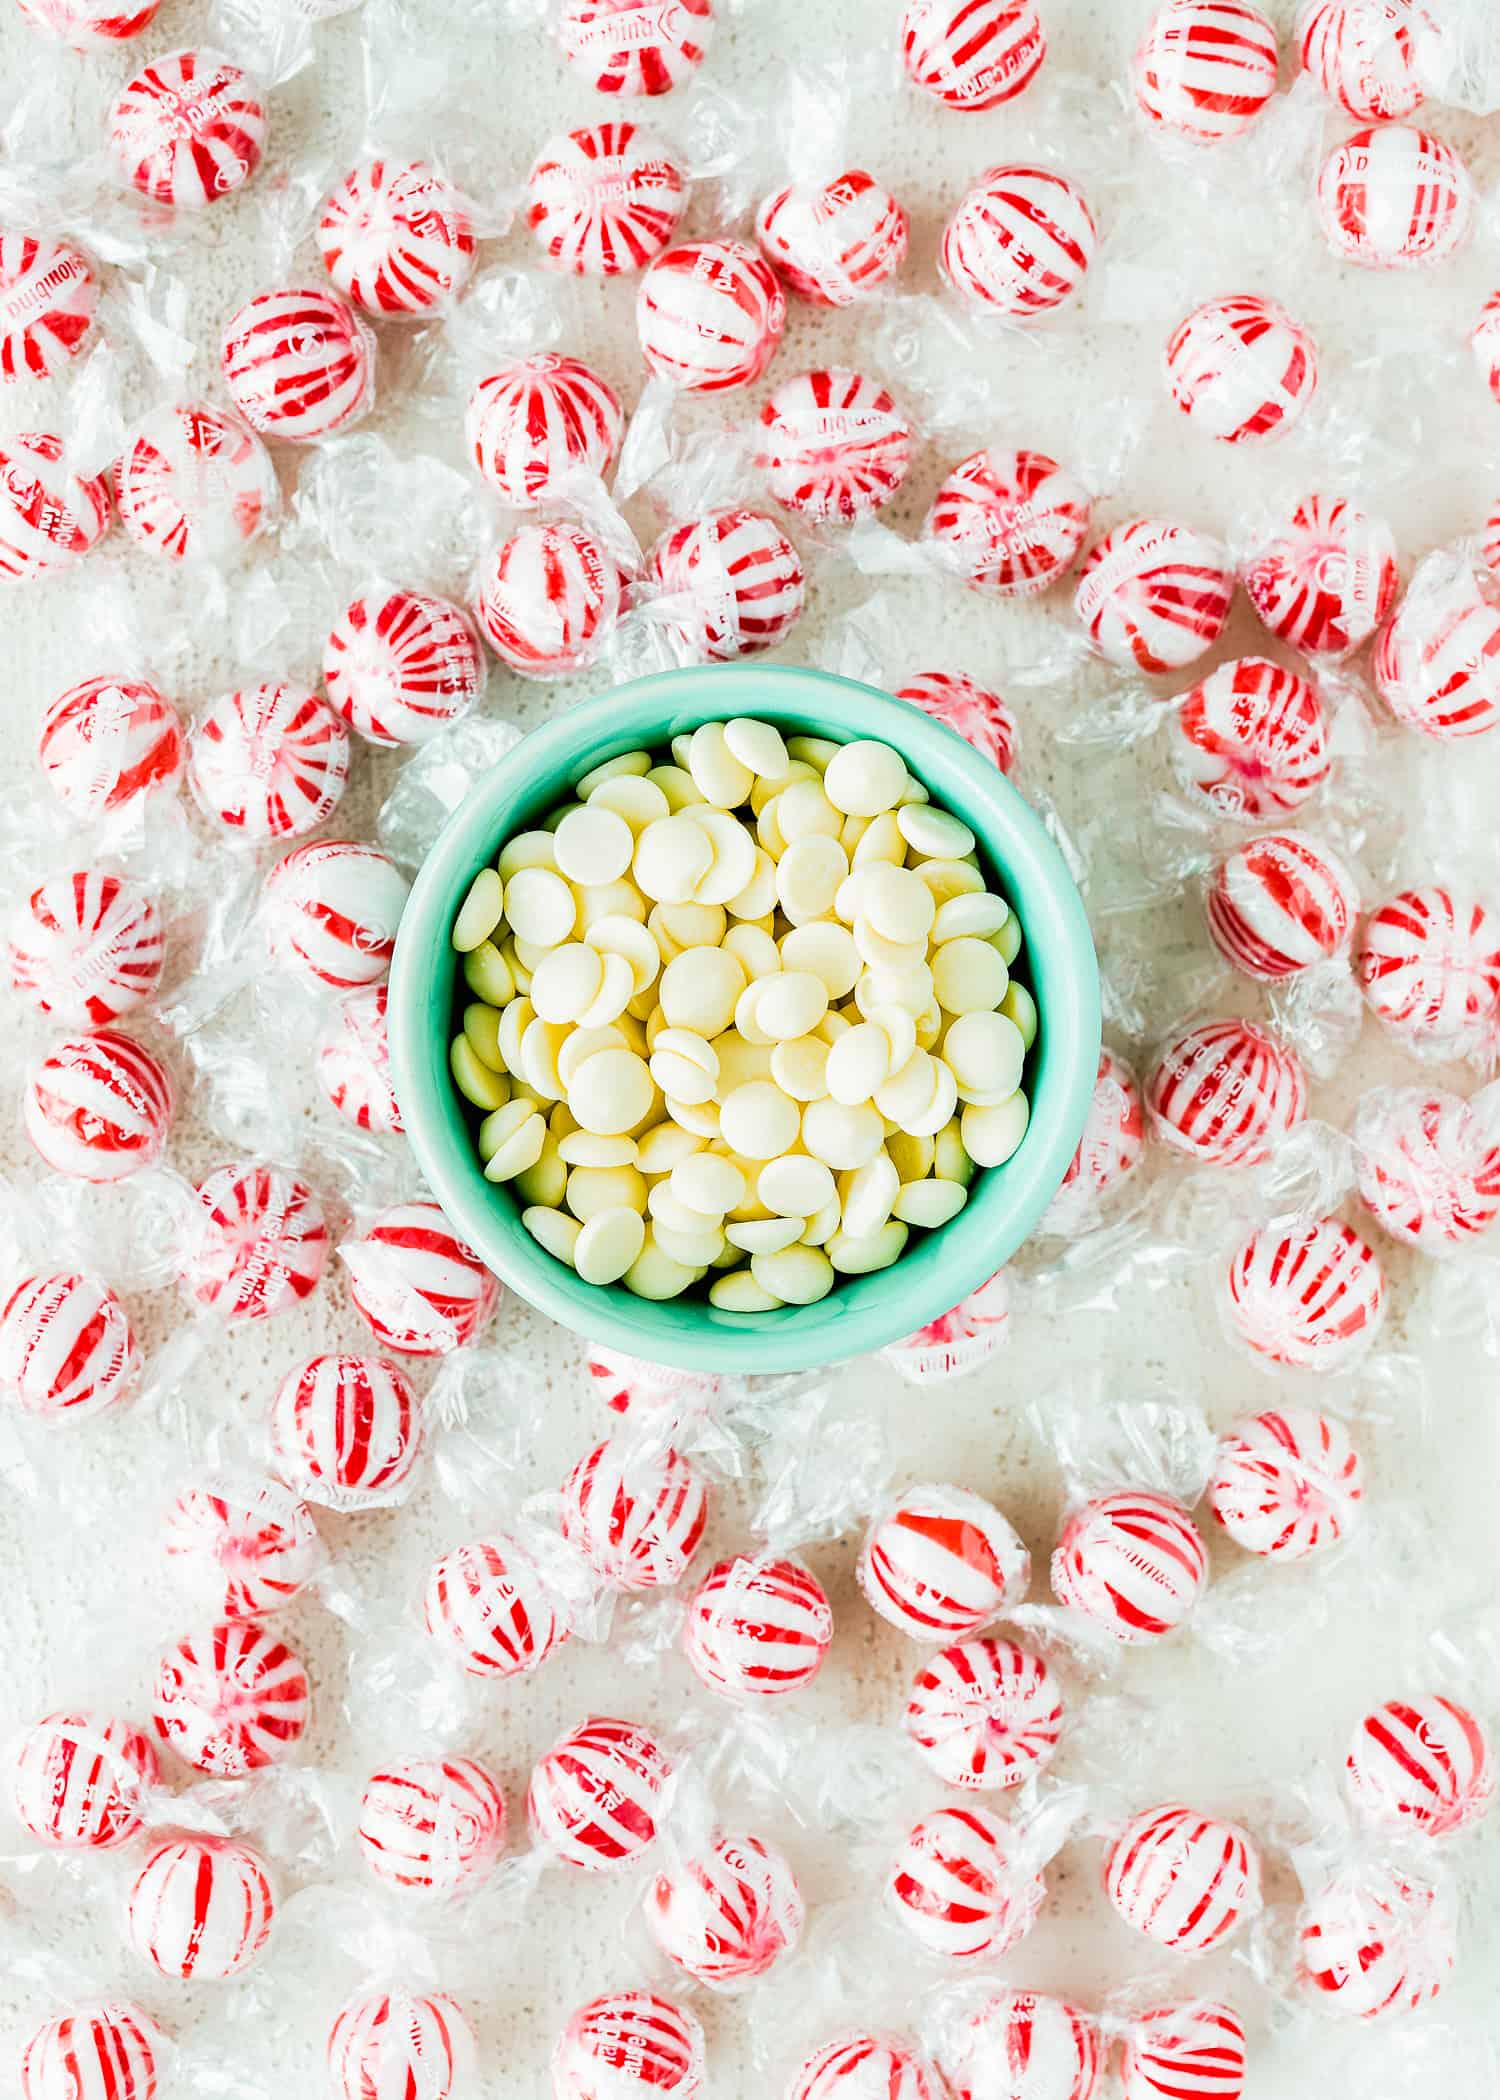 white chocolate and peppermint candies